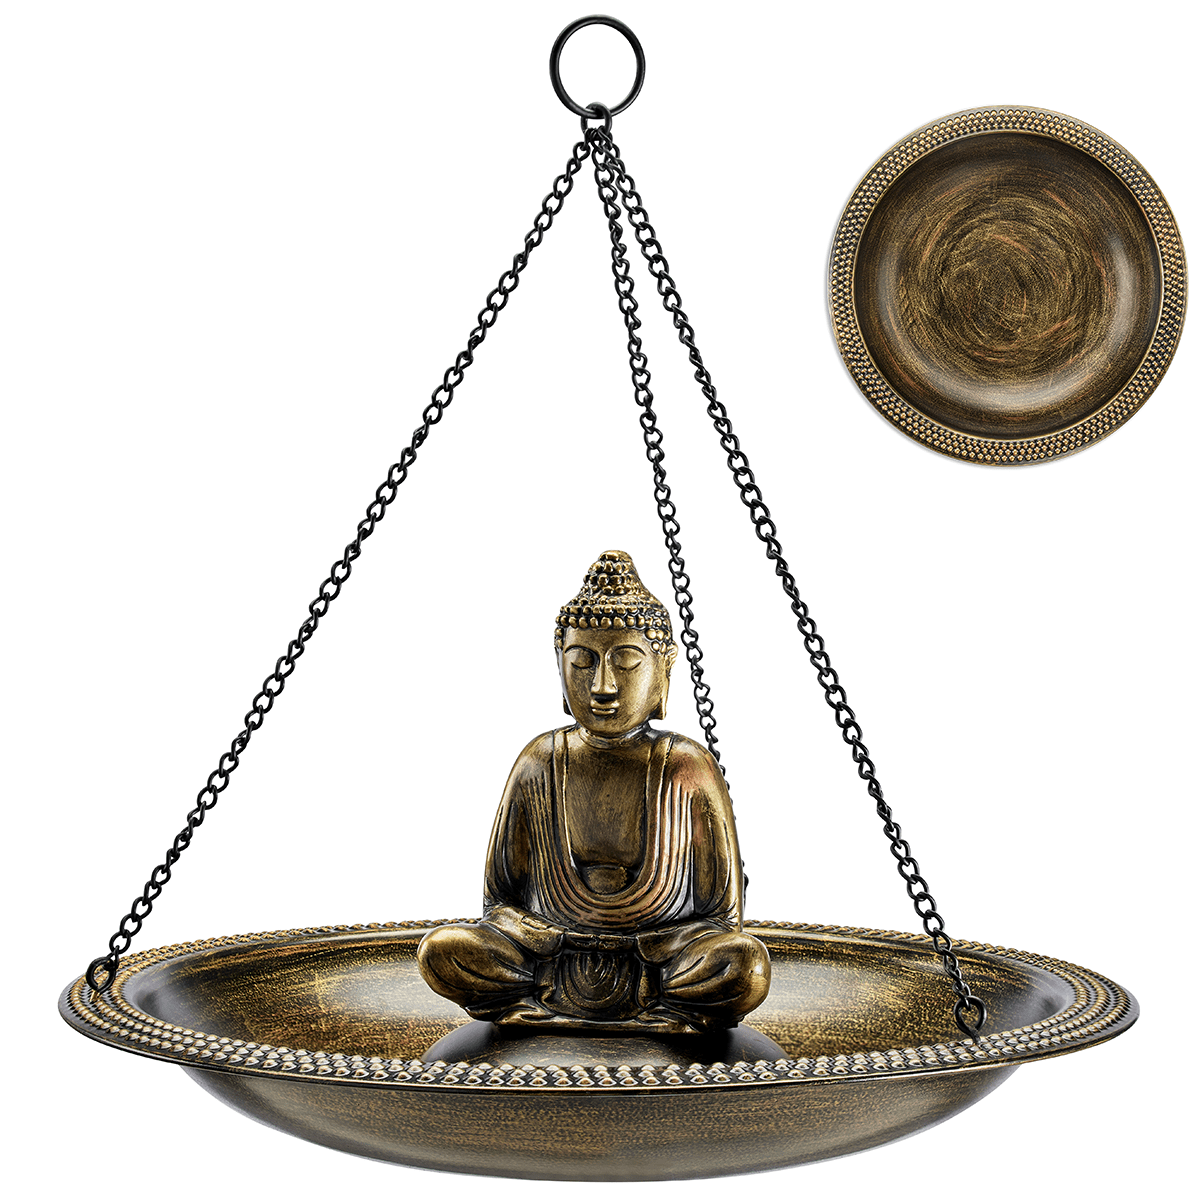 18" Hanging Copper Bird Bath with Buddha - Good Directions